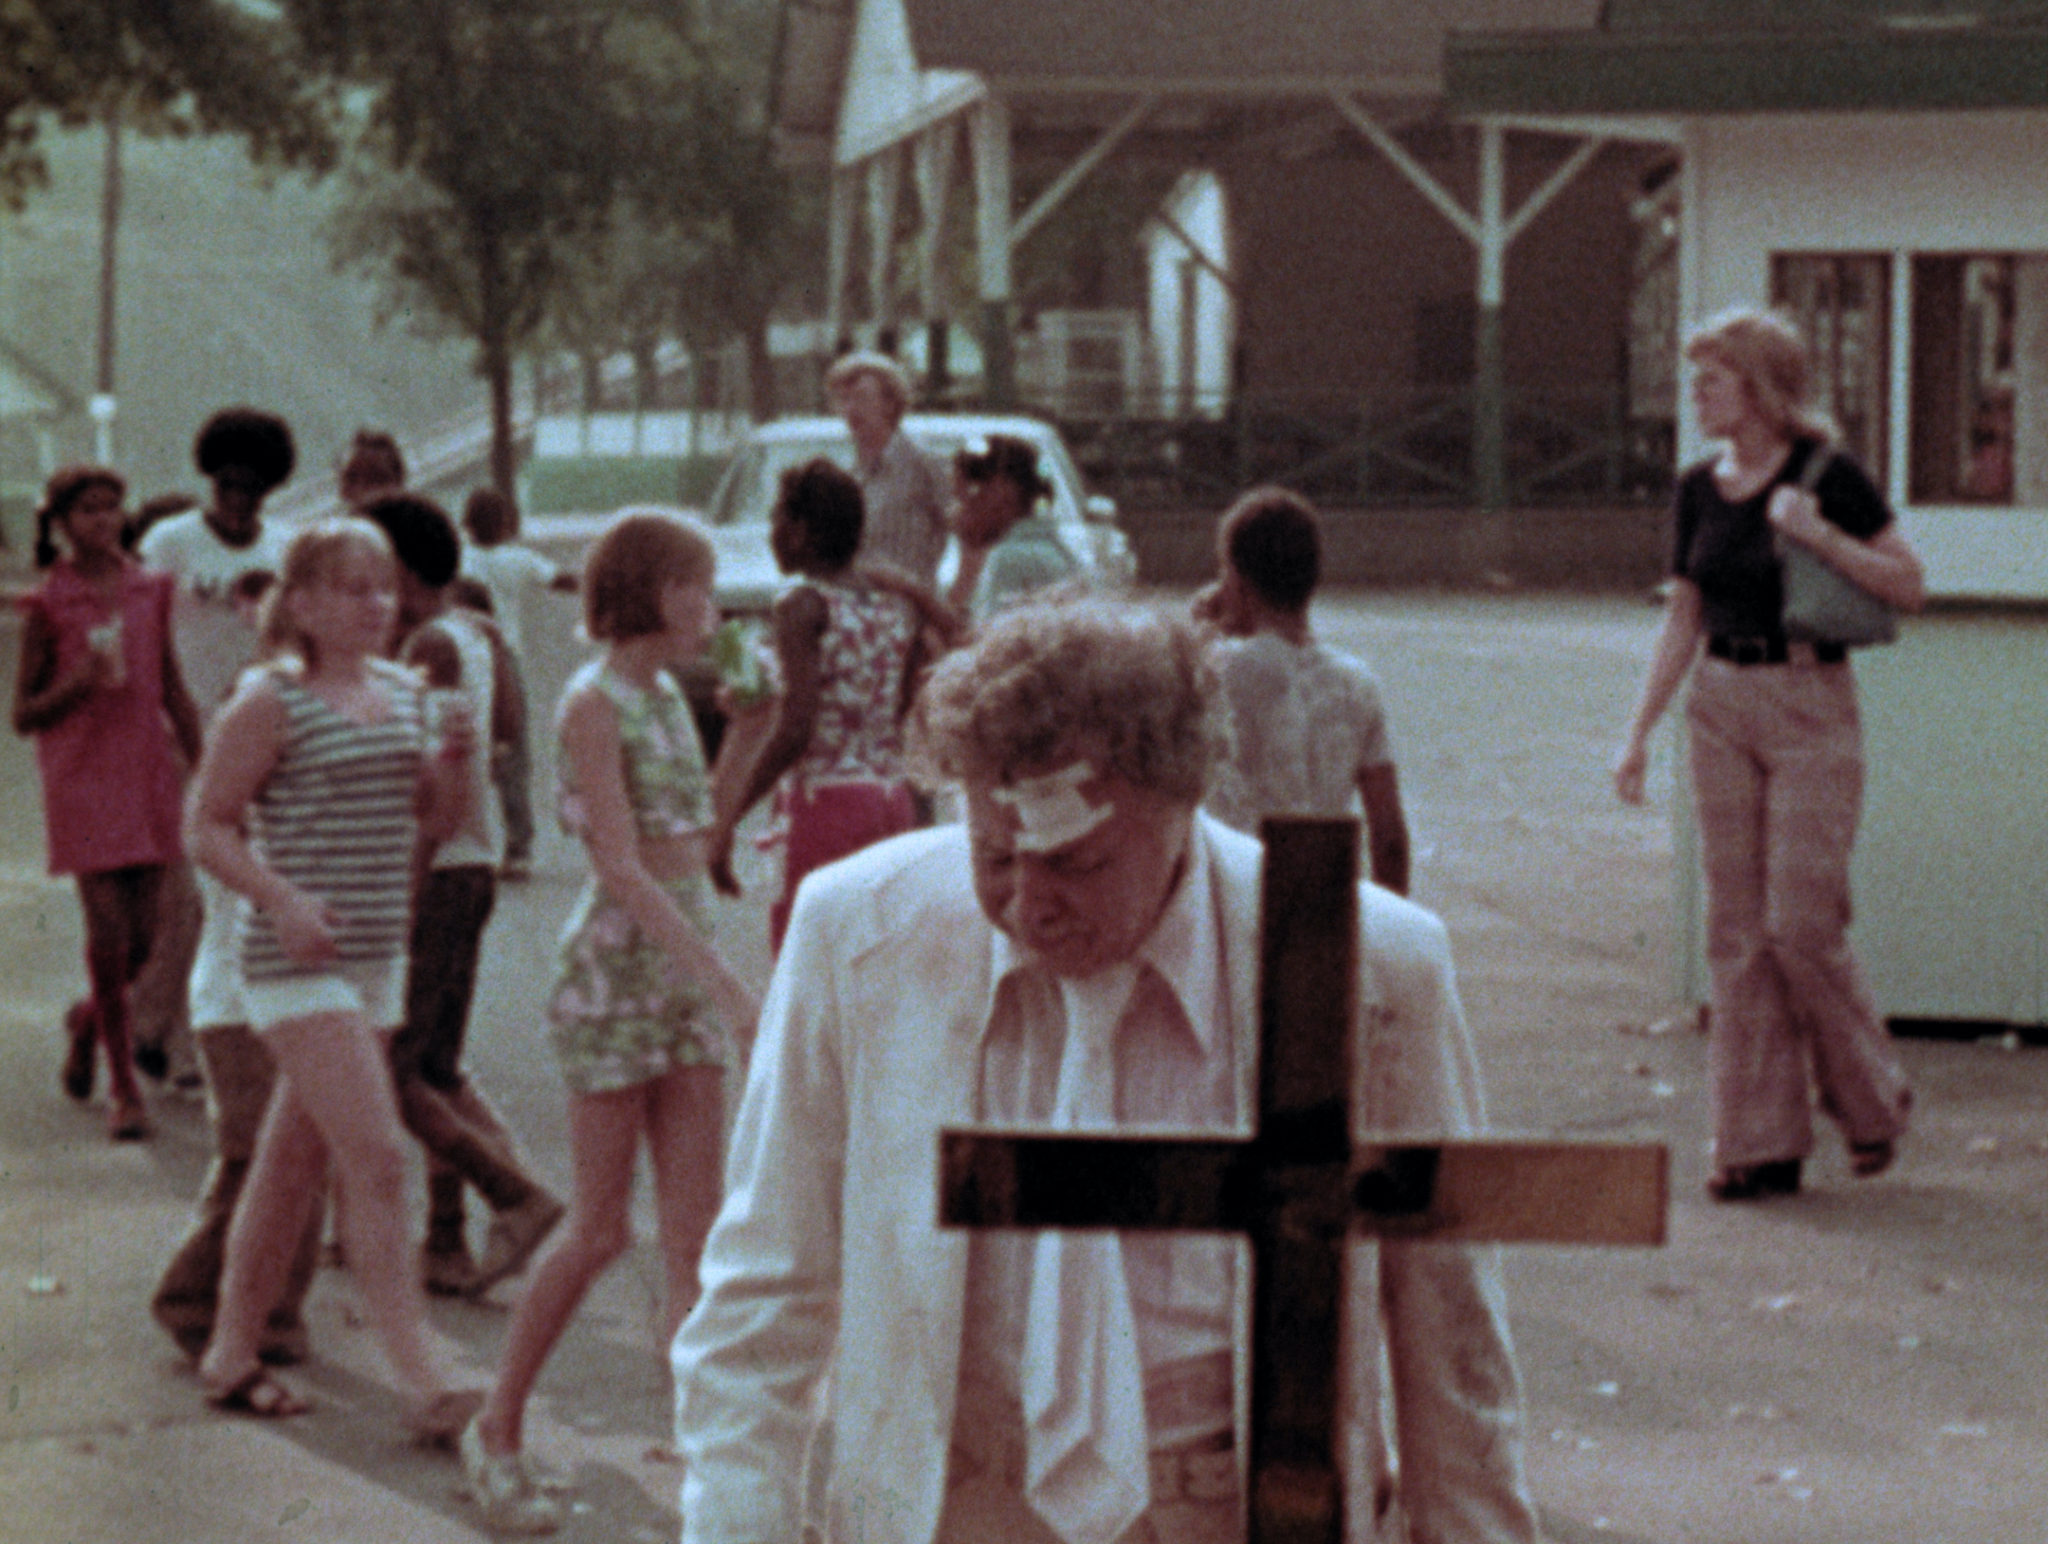 The Parade Marches On: George A. Romero’s ‘The Amusement Park’ (1975)